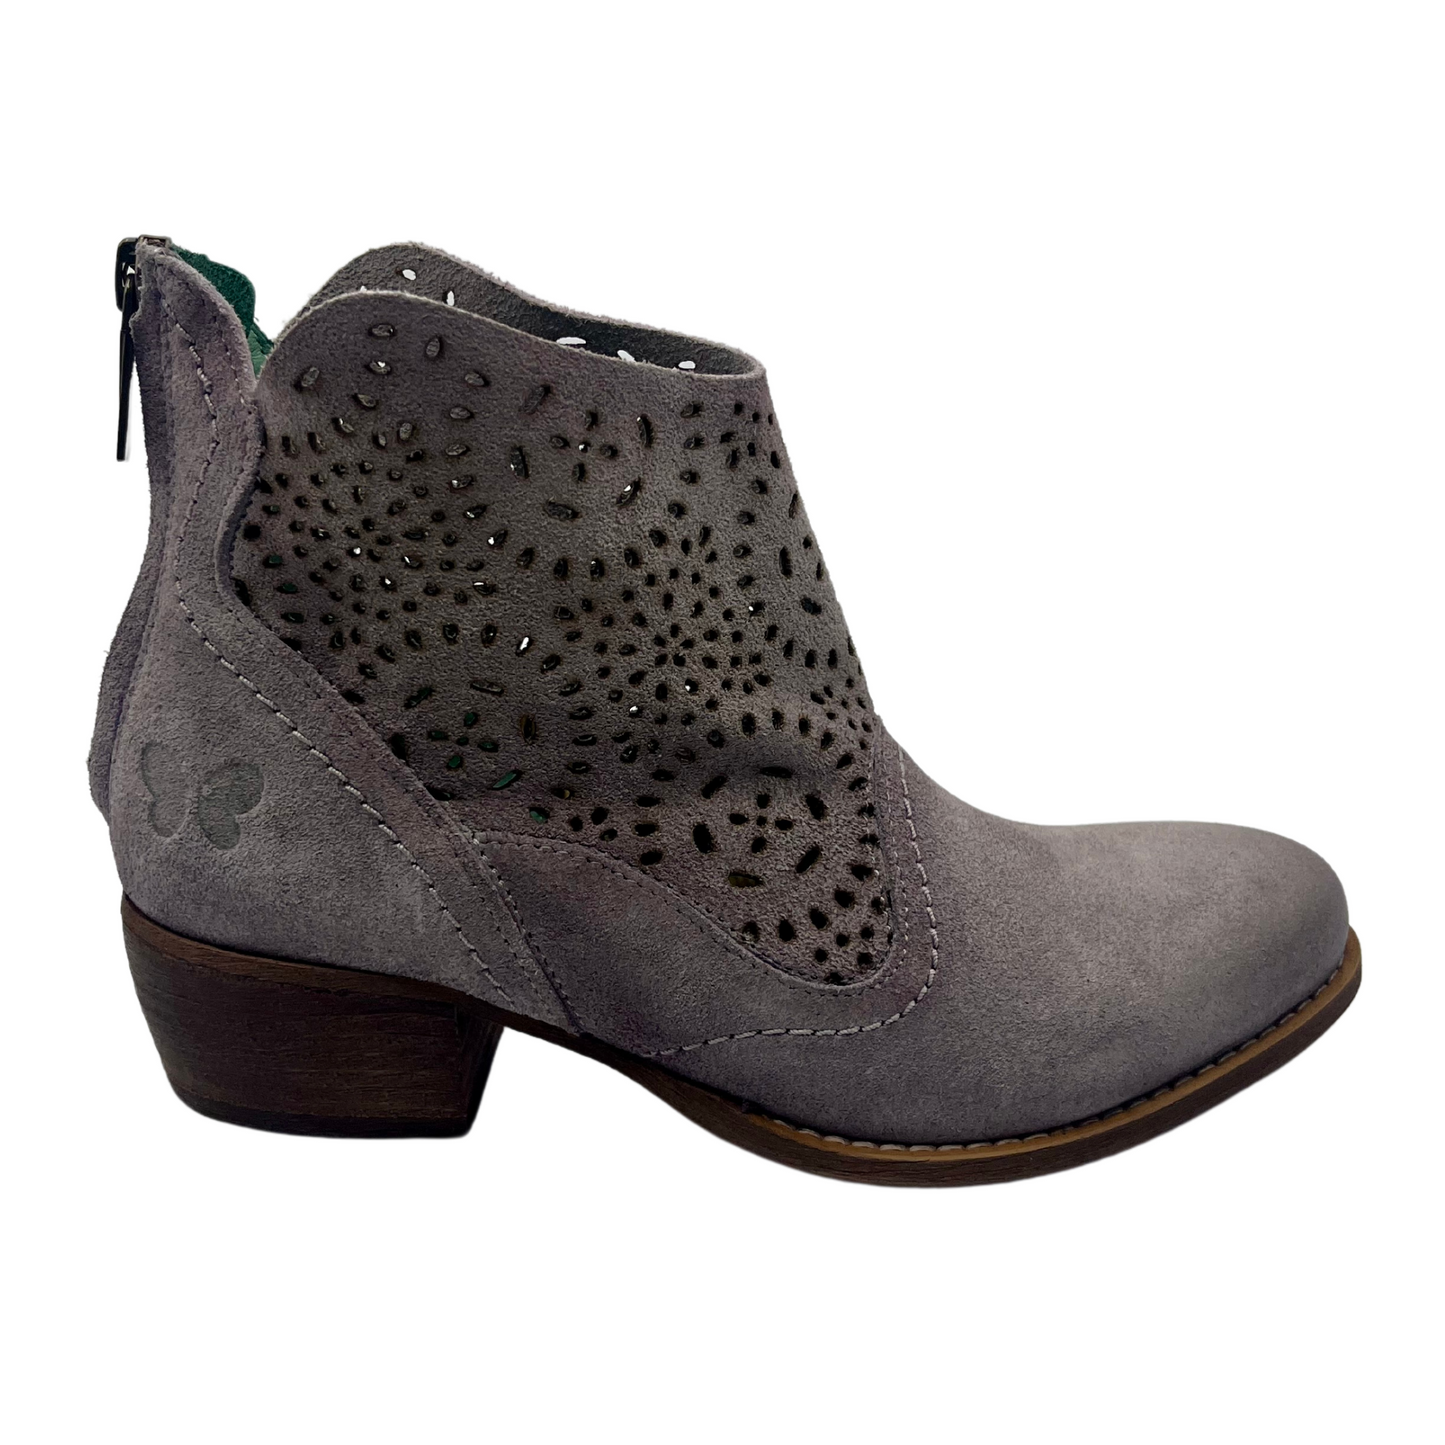 Right facing view of smokey lavender leather short cowboy boot with cutout details and zipper closure